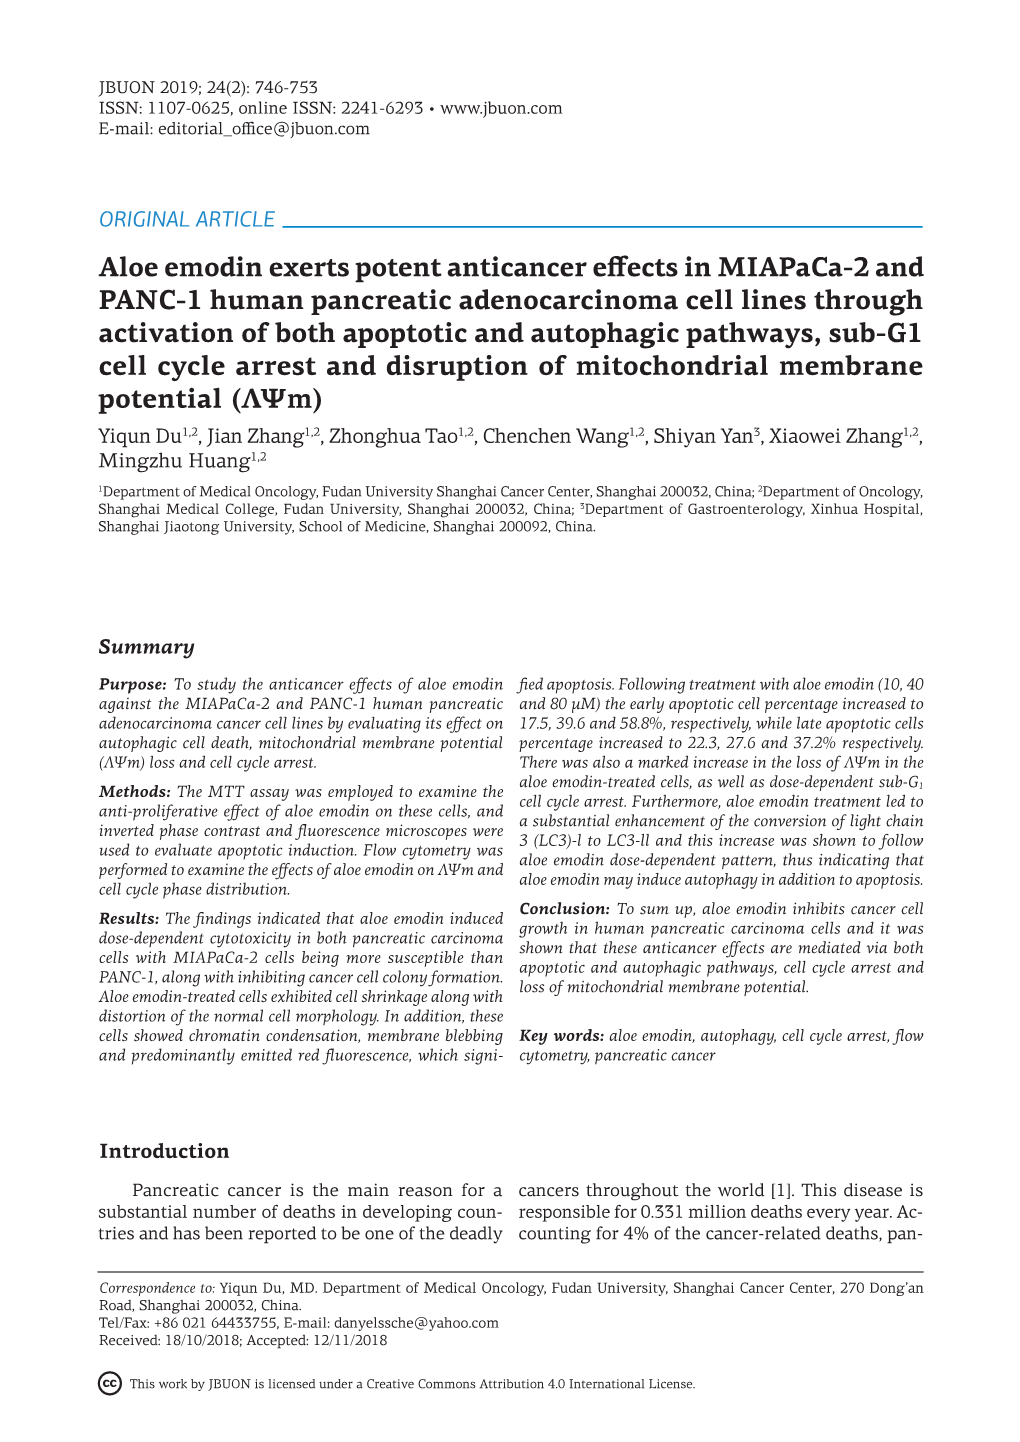 Aloe Emodin Exerts Potent Anticancer Effects in Miapaca-2 and PANC-1